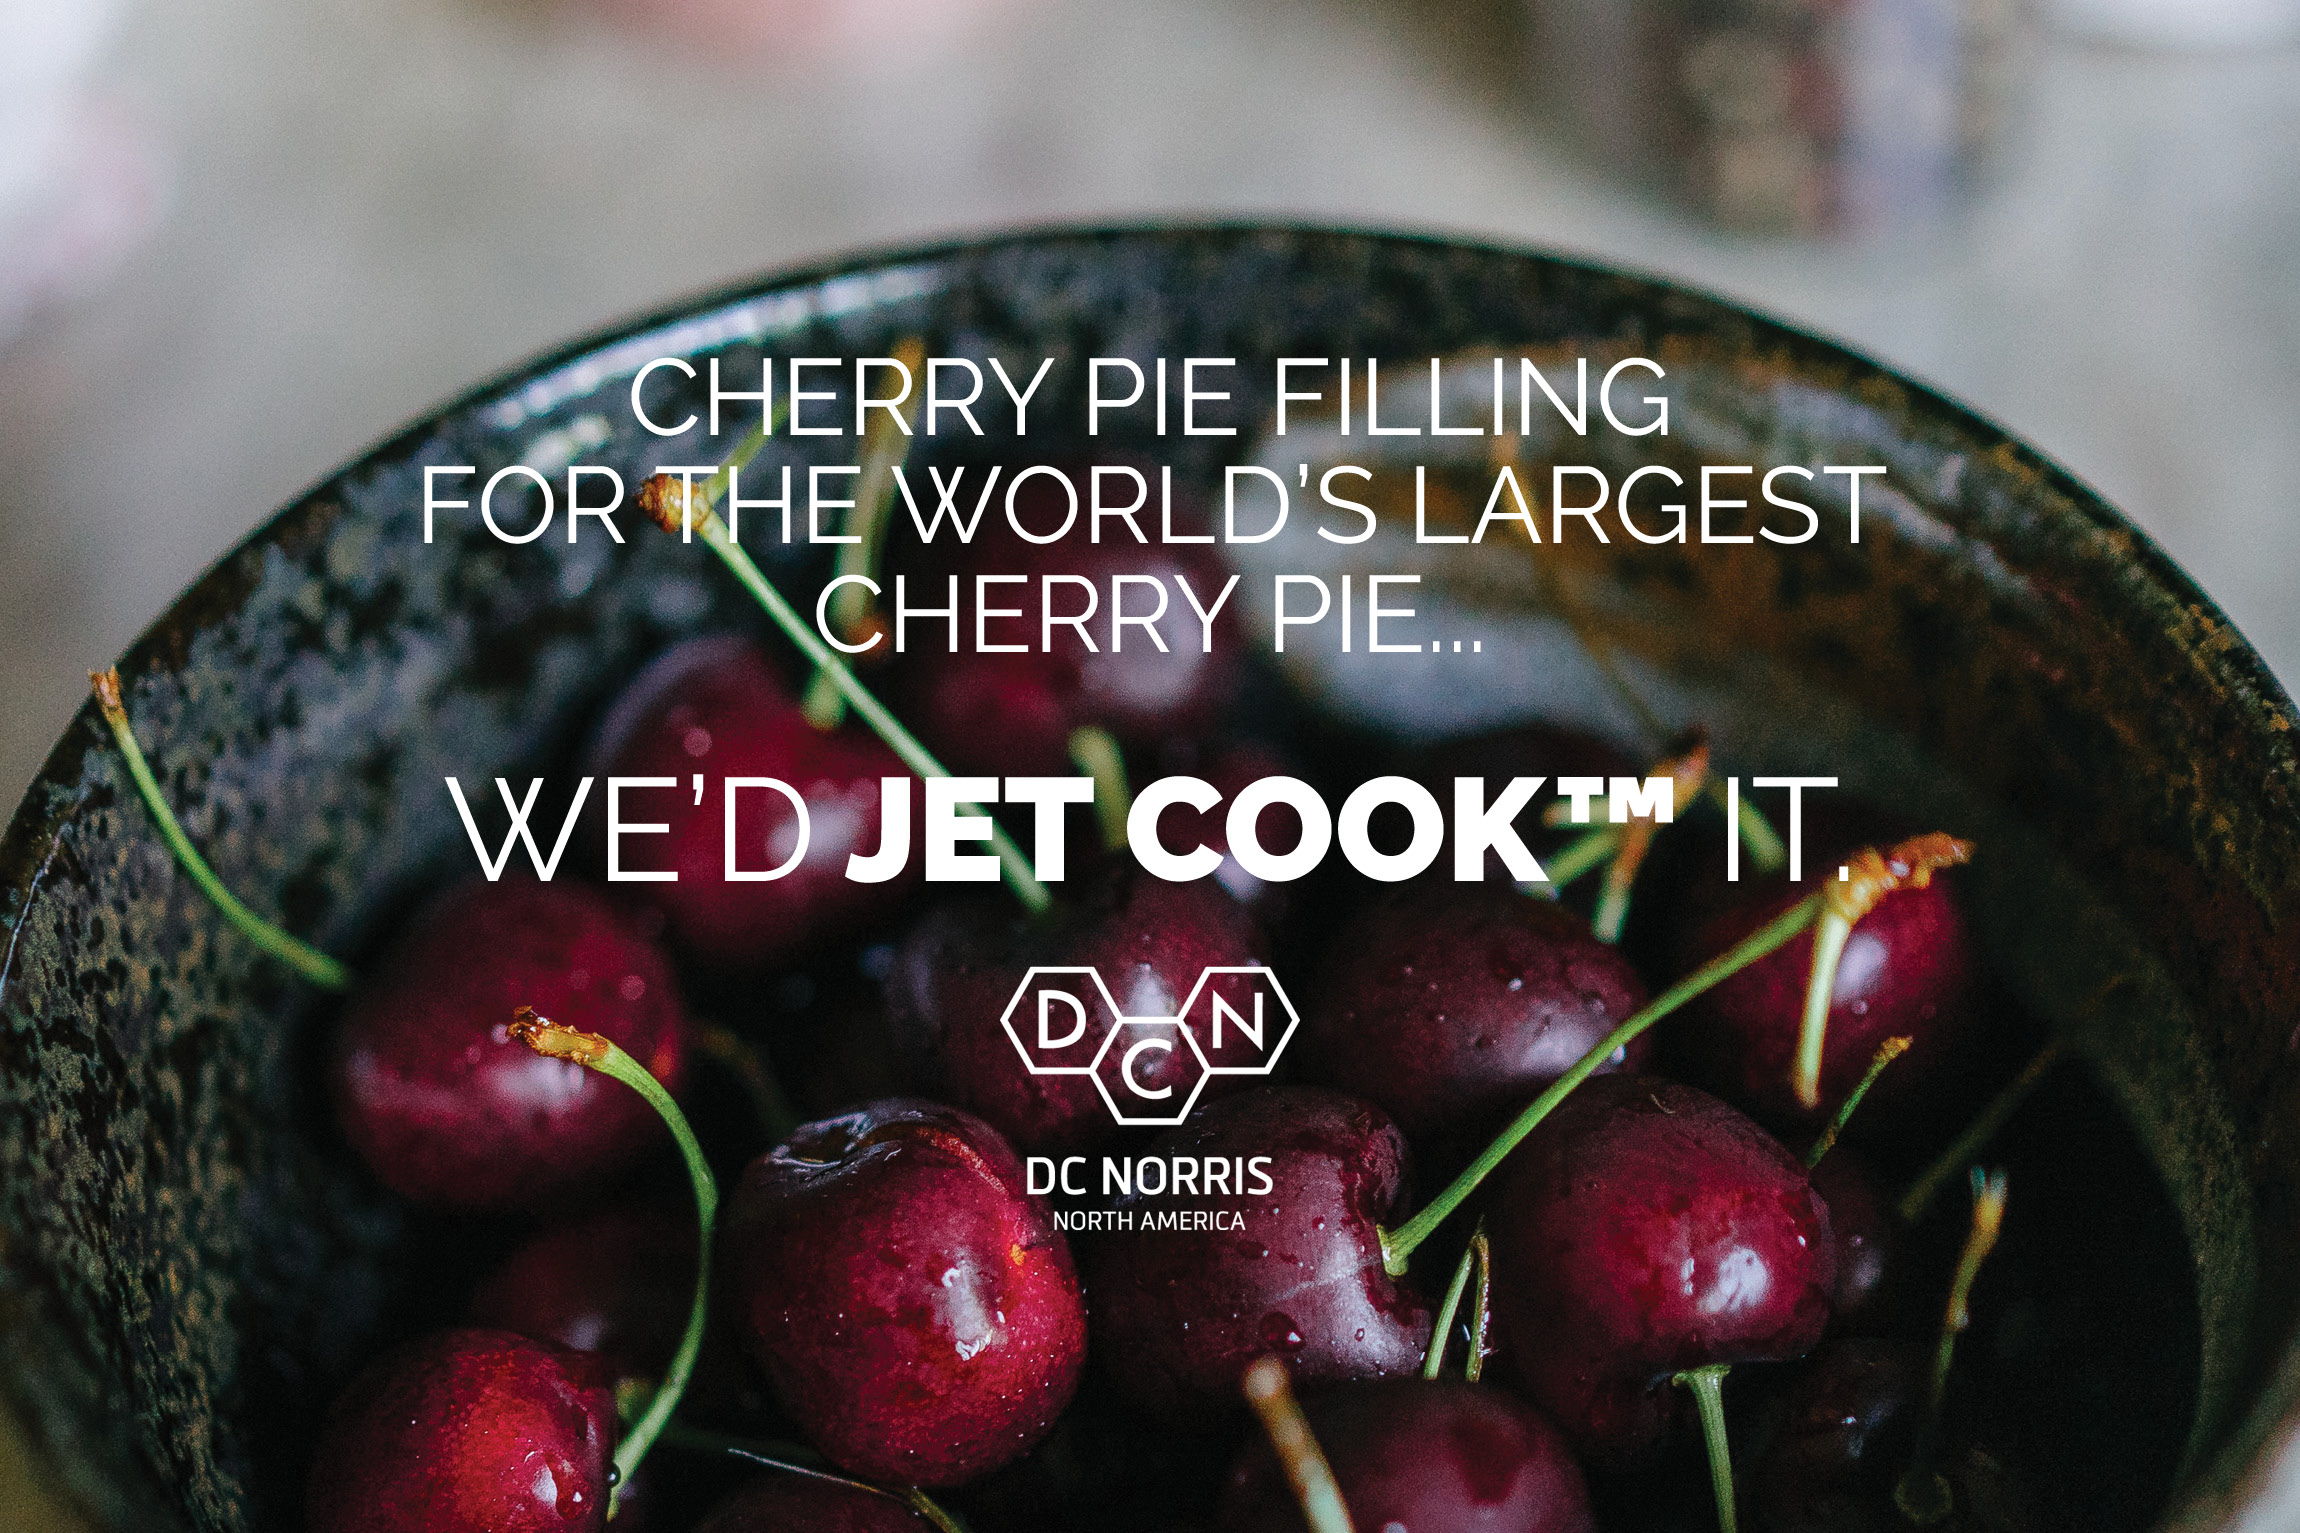 how would DC Norris North America prepare enough pie filling to fill The World's Largest Cherry Pie? Jet Cook™ of course.